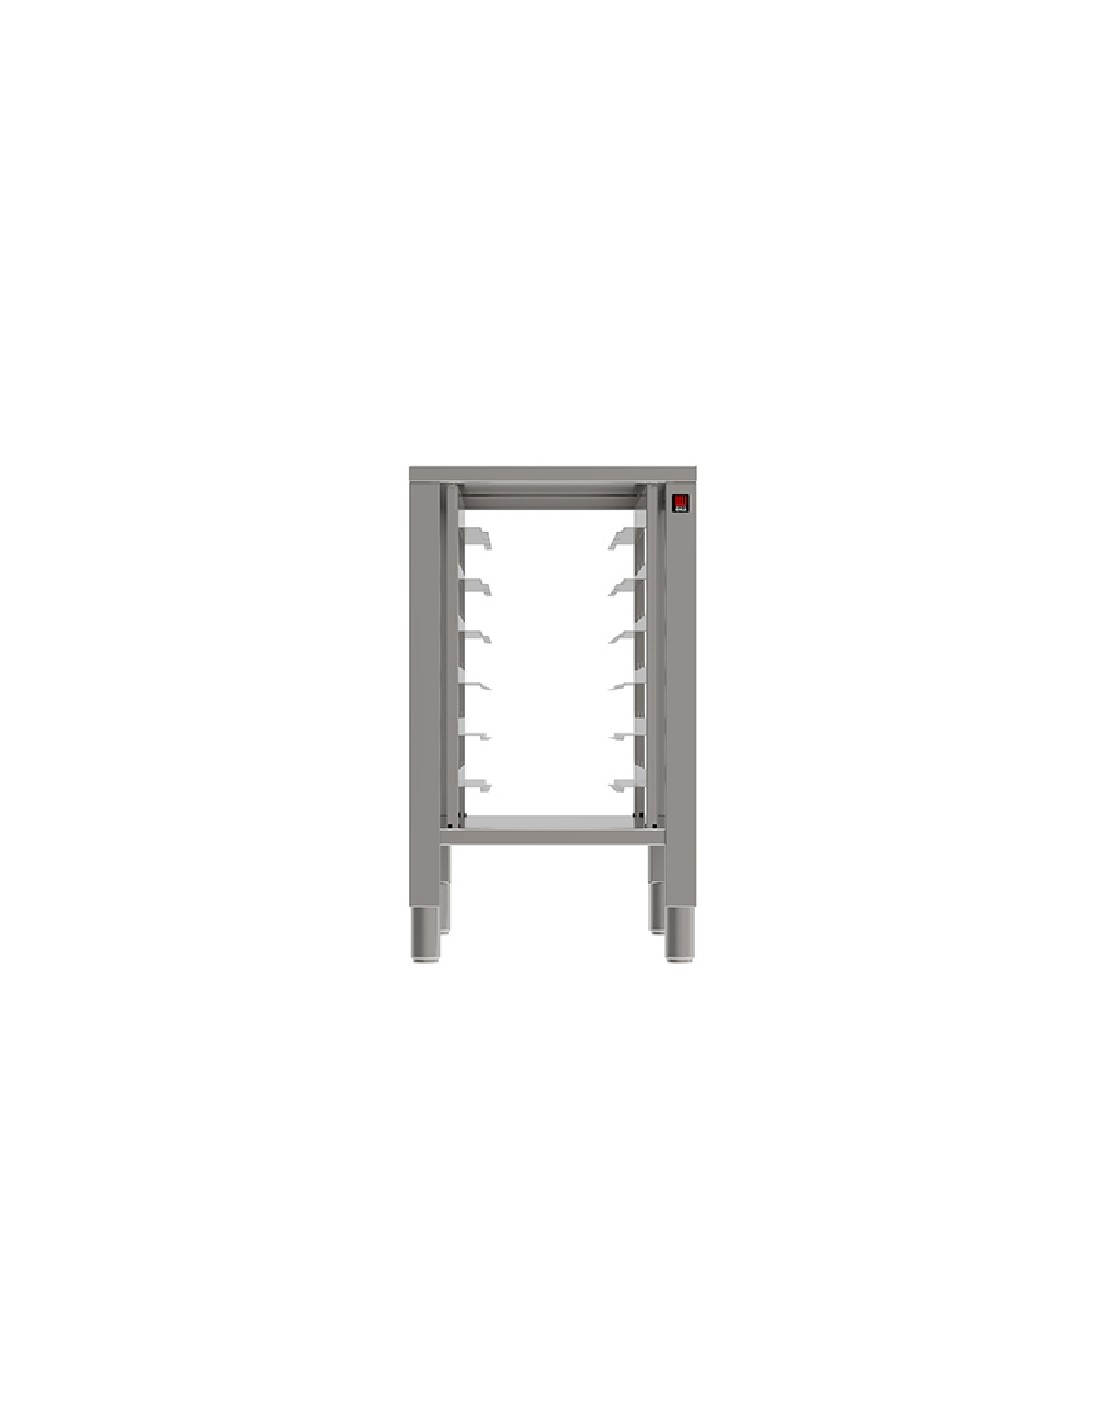 Fixed table - Acciaio inox AISI 430 - With supports - Dimensions cm 50 x 55.6 x77h